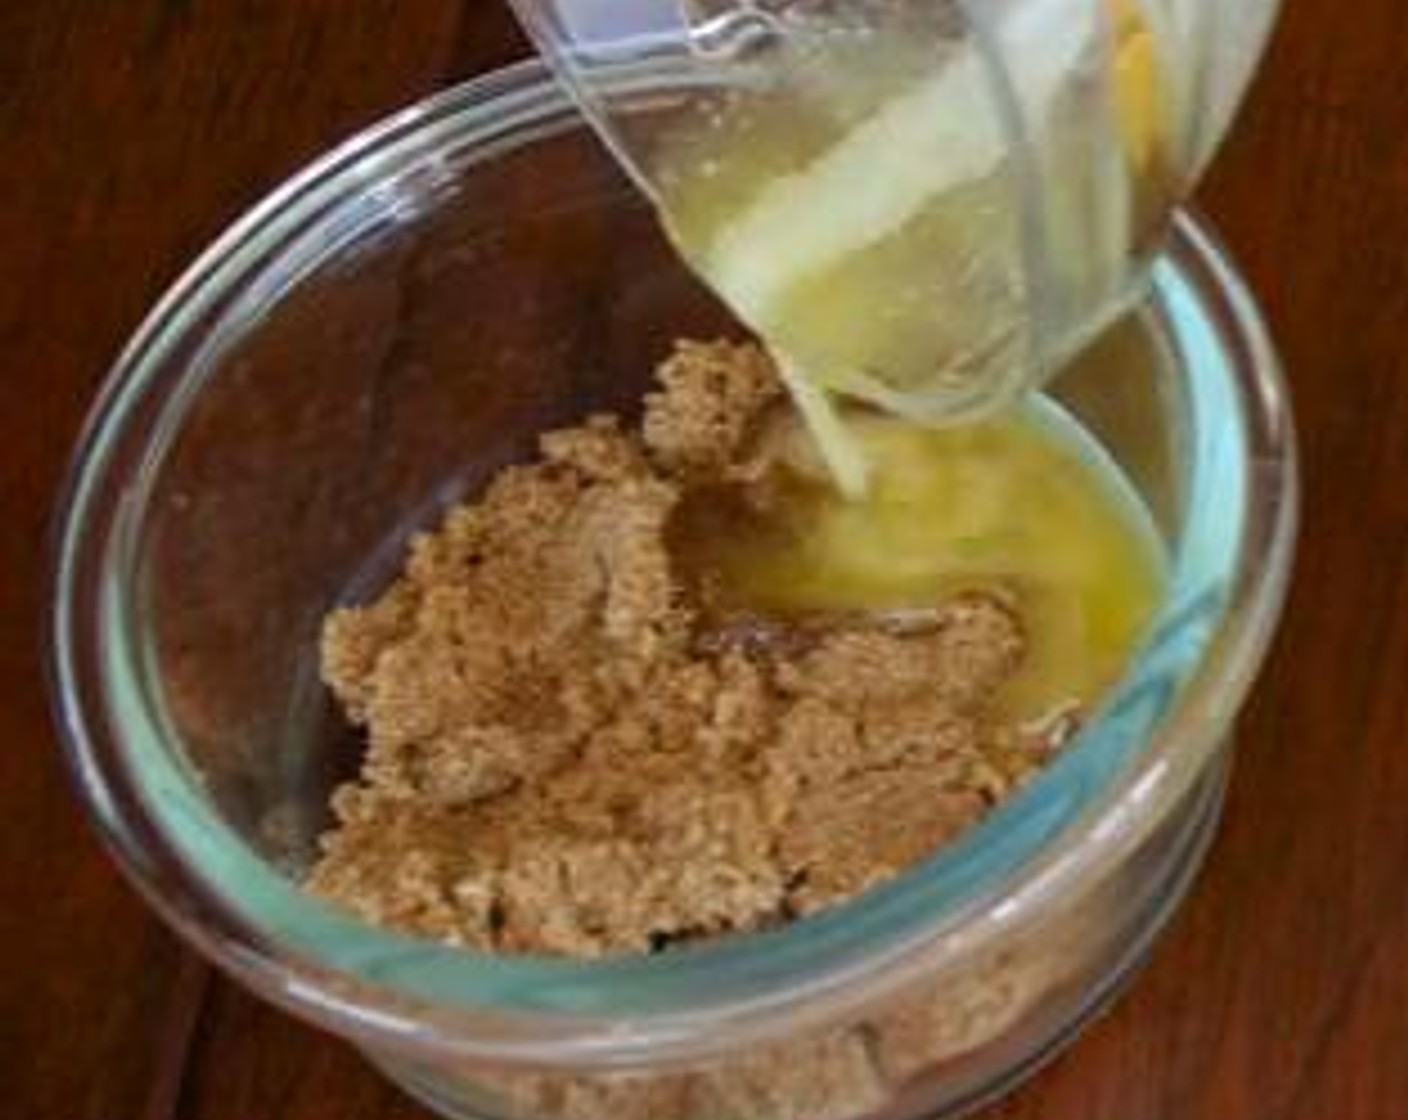 step 3 Melt butter in microwave for 30-40 seconds. Mix the Unsalted Butter (1 Tbsp) in a small cup or bowl with Brown Sugar (2 Tbsp).